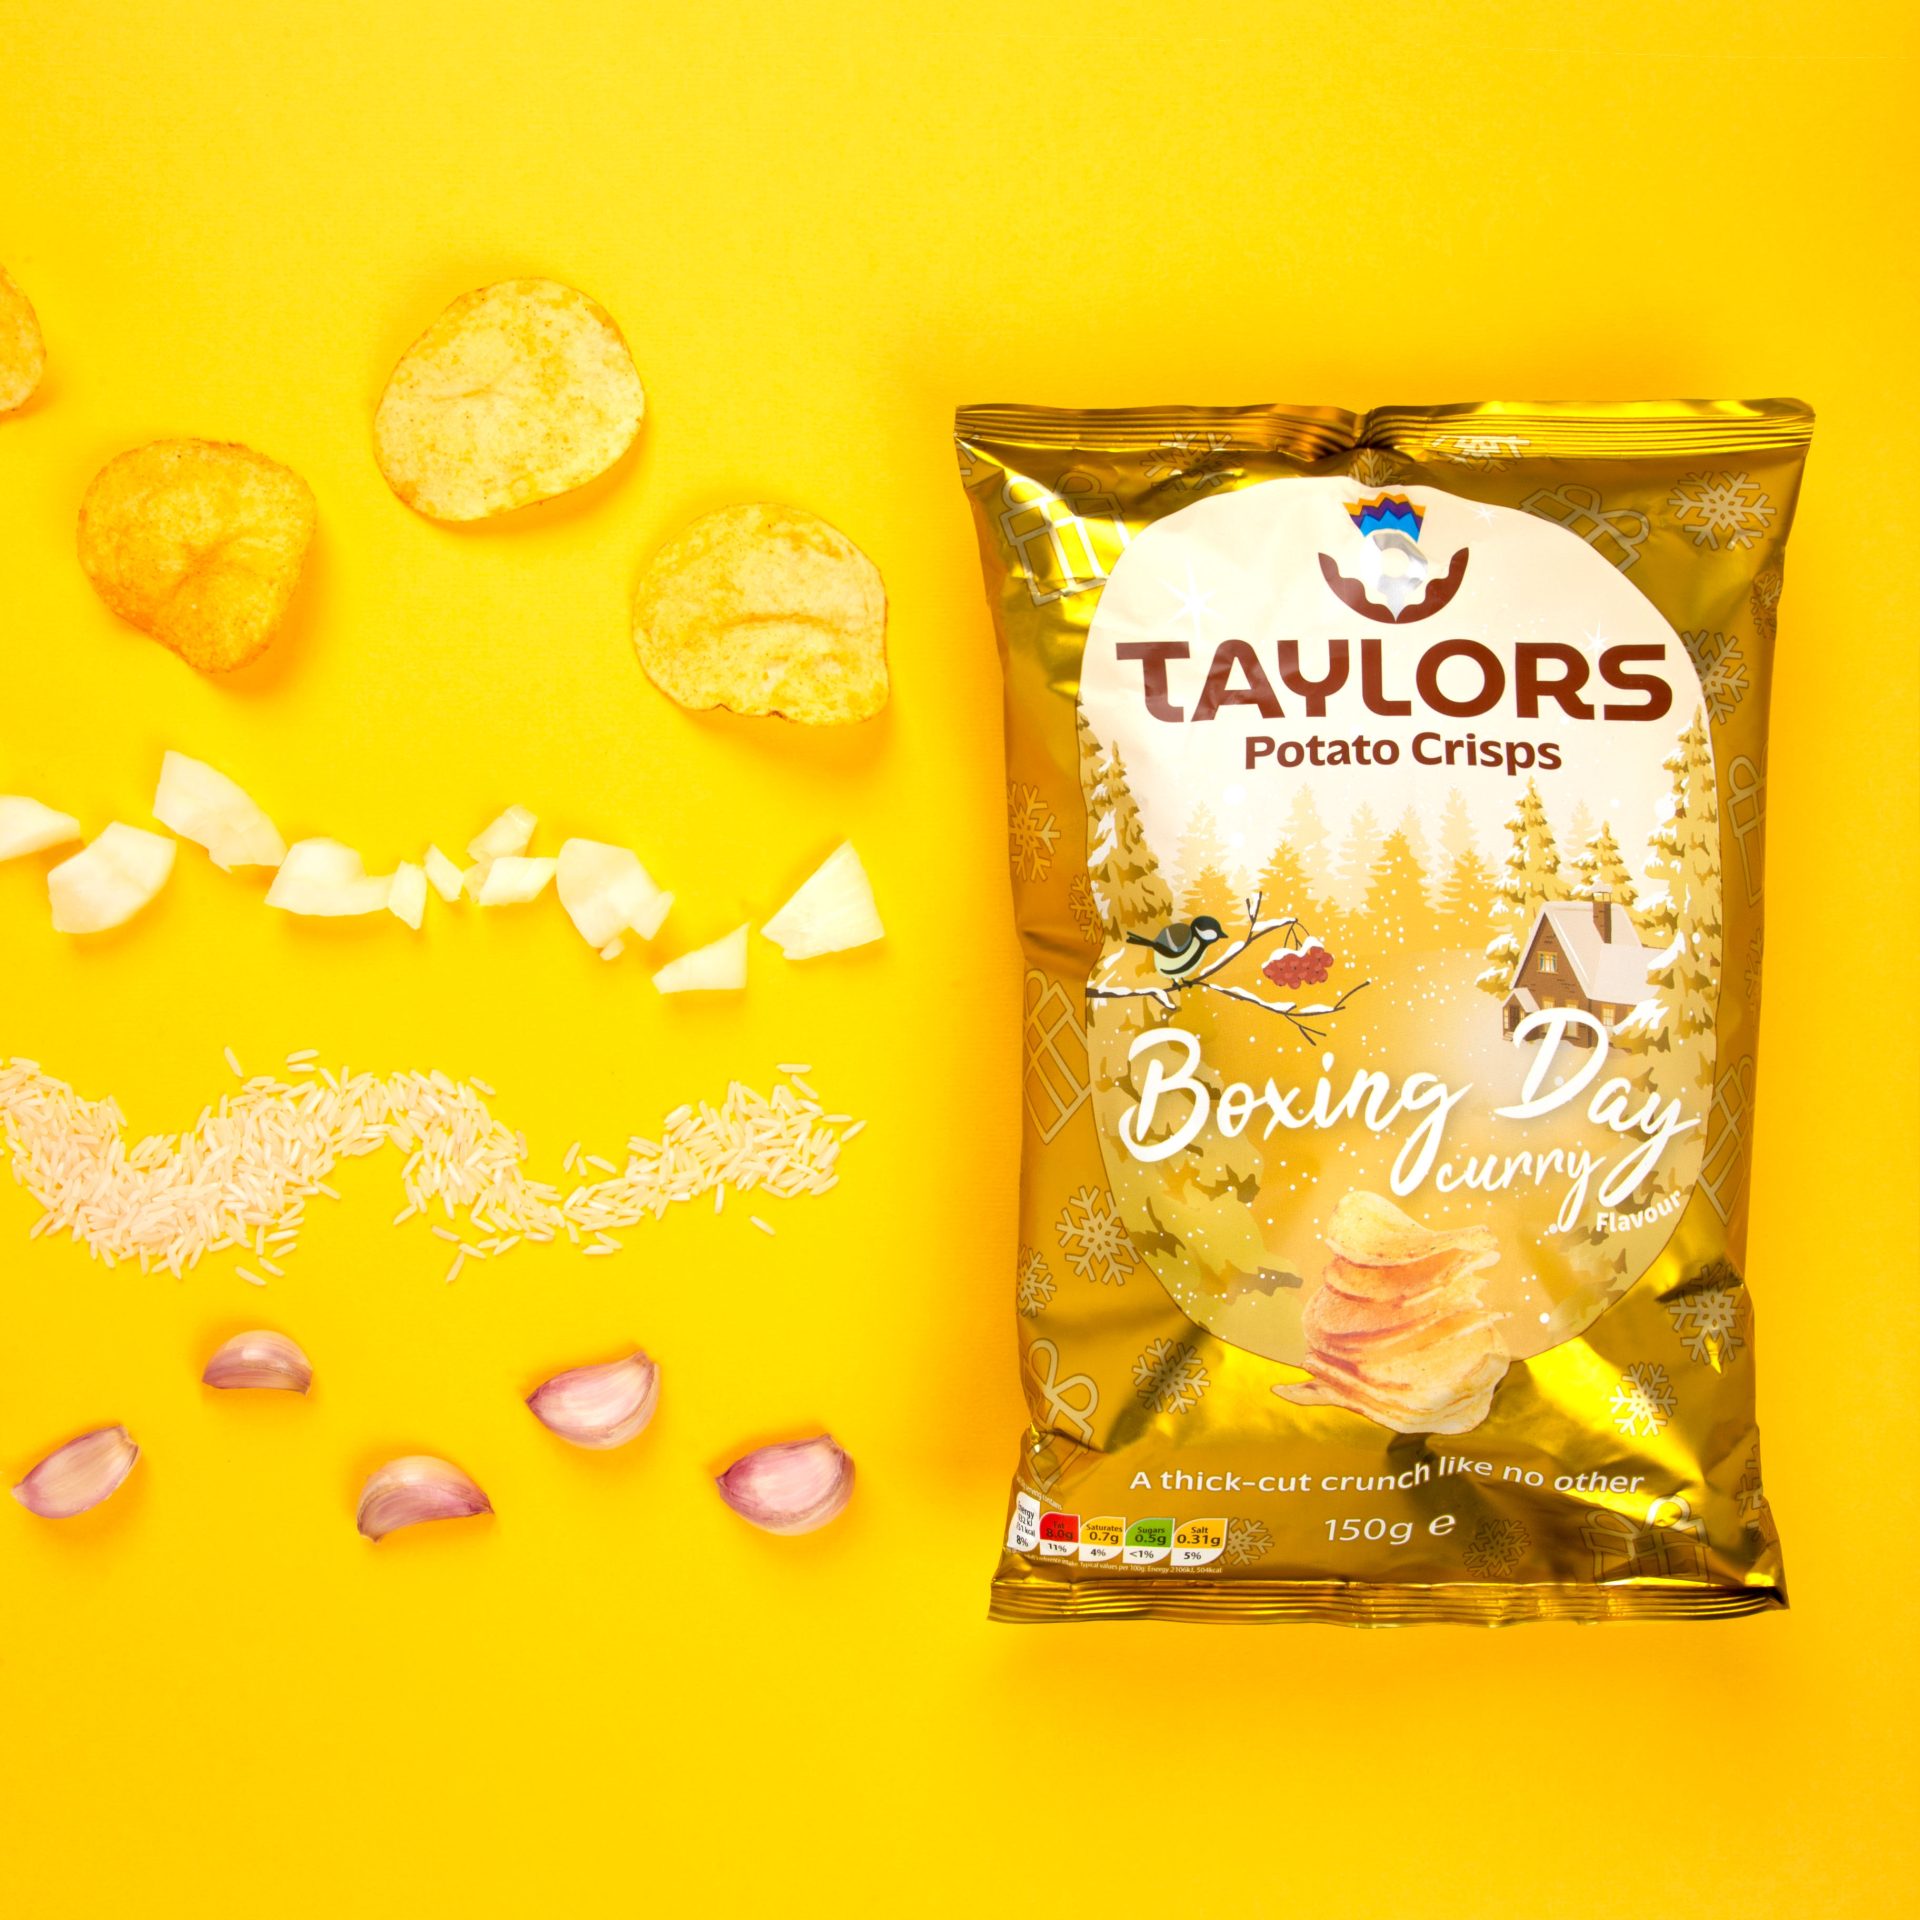 Taylors Boxing Day Curry crisps